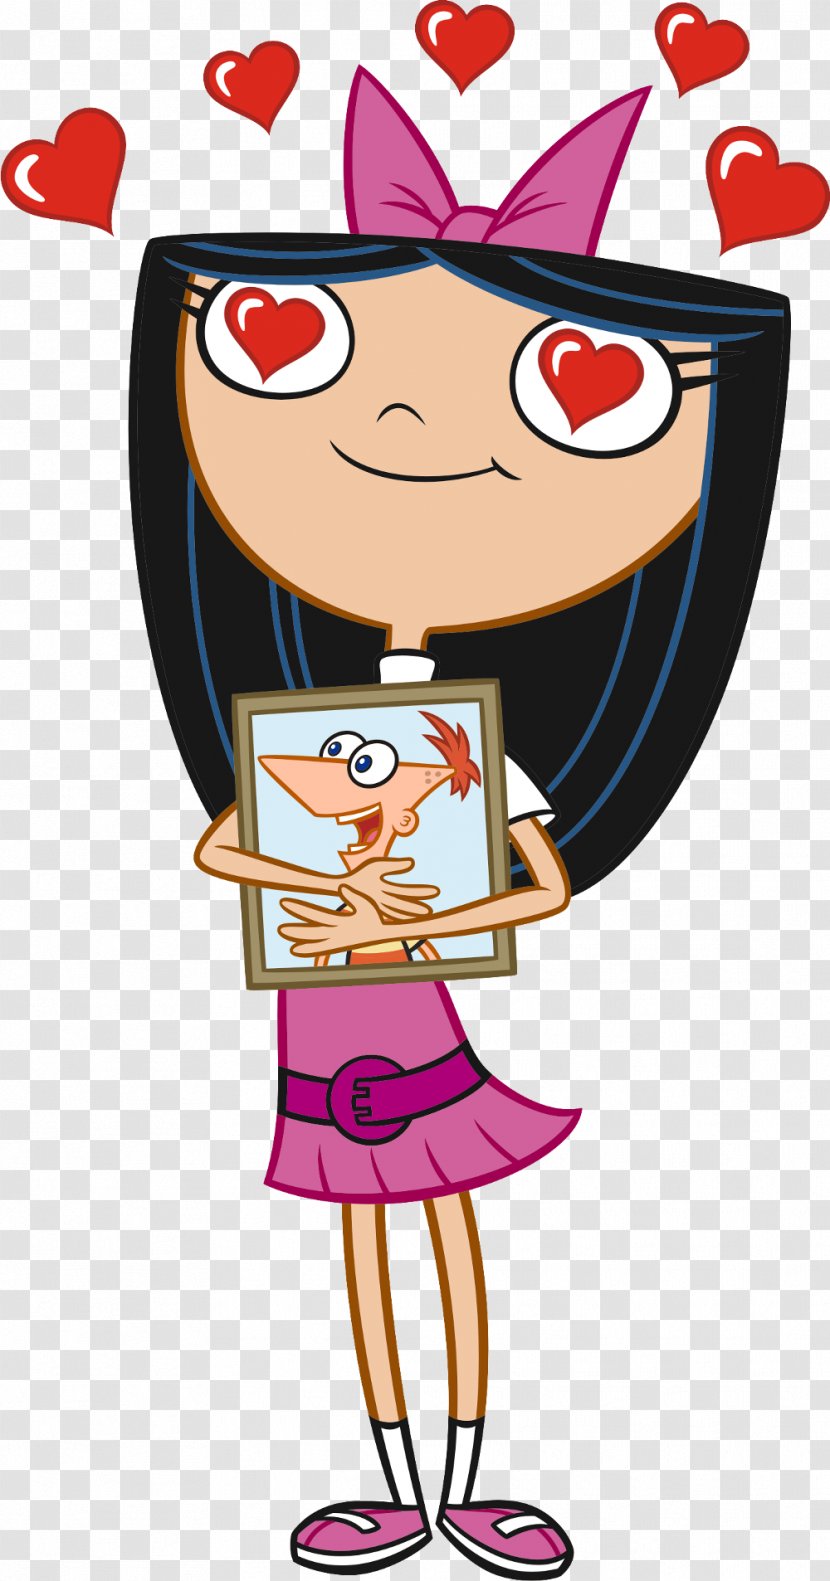 Isabella Garcia-Shapiro Phineas Flynn Ferb Fletcher Perry The Platypus Costume - And Mission Marvel - Characters Transparent PNG